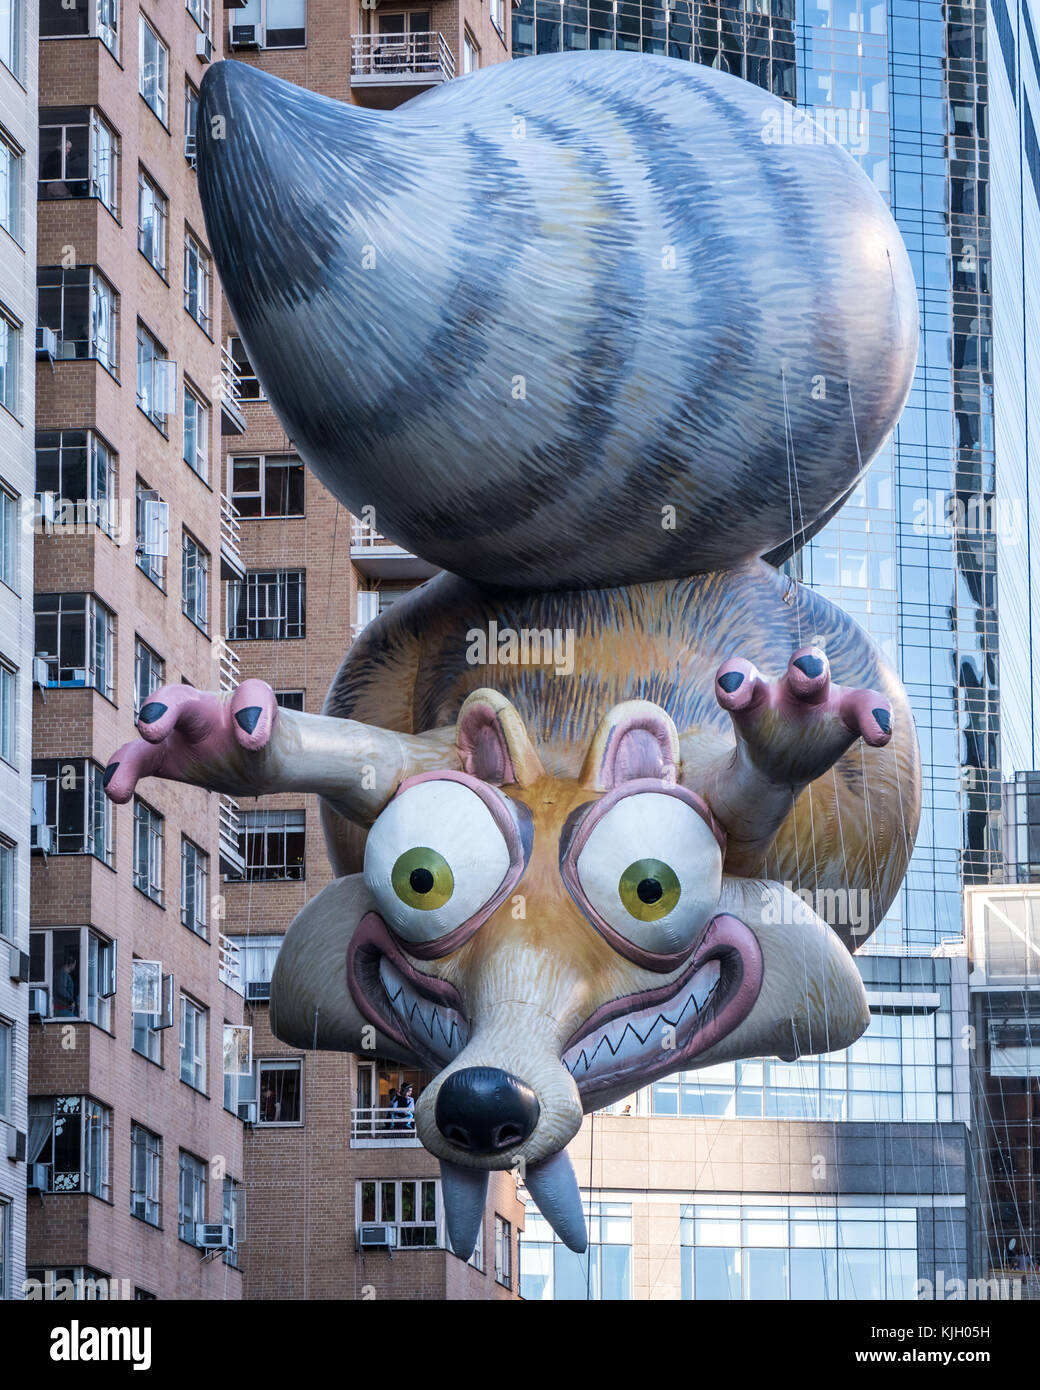 New York, USA. 23rd Nov, 2017. New York, USA, A balloon of Ice Age's Scrat participates in the 2017 Macy's Thanksgiving Day parade through New York's Central Park South. Credit: Enrique Shore/Alamy Live News Stock Photo